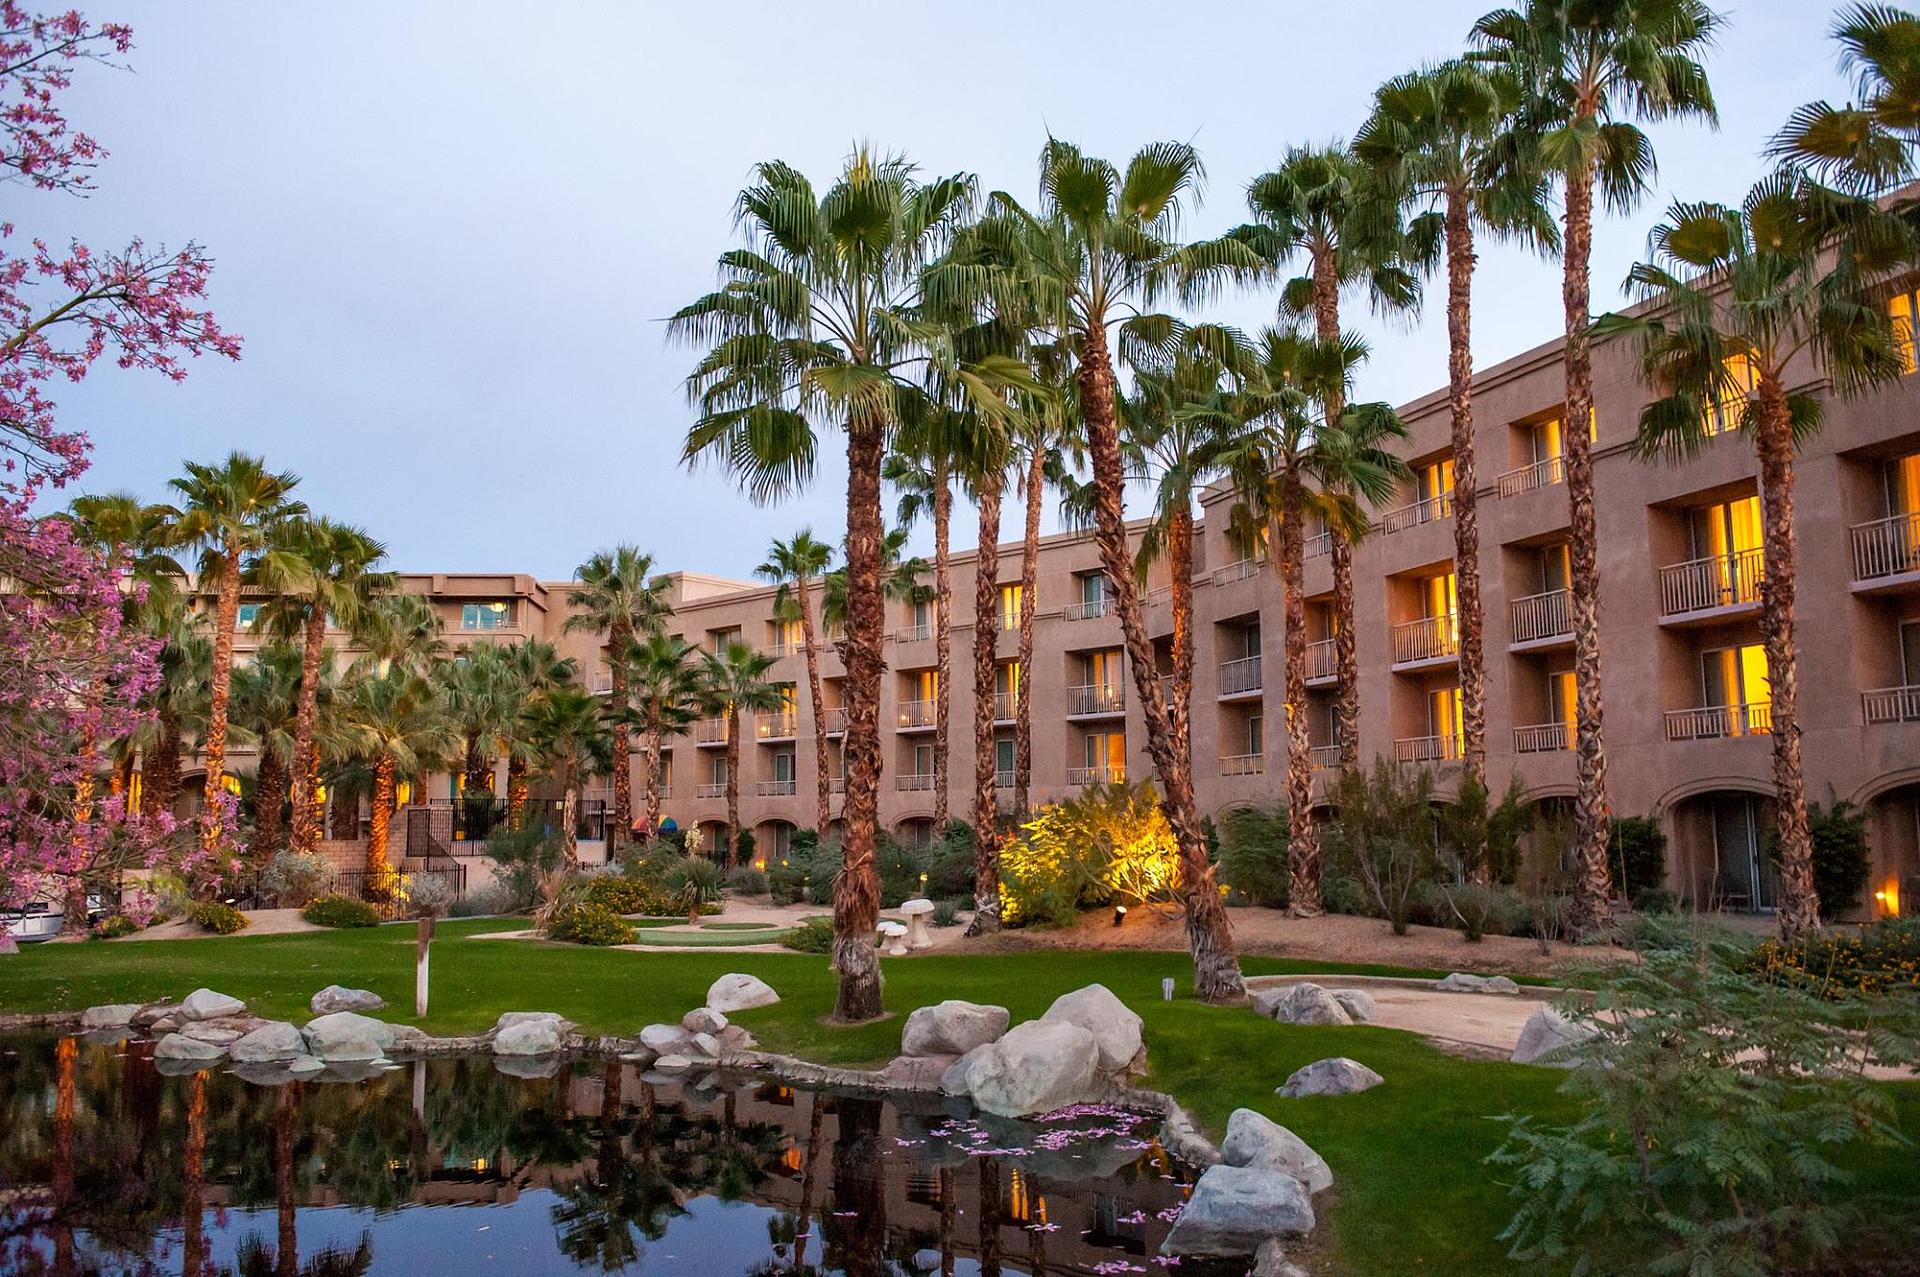 Experience our all-suite resort at Hyatt Palm Springs, California